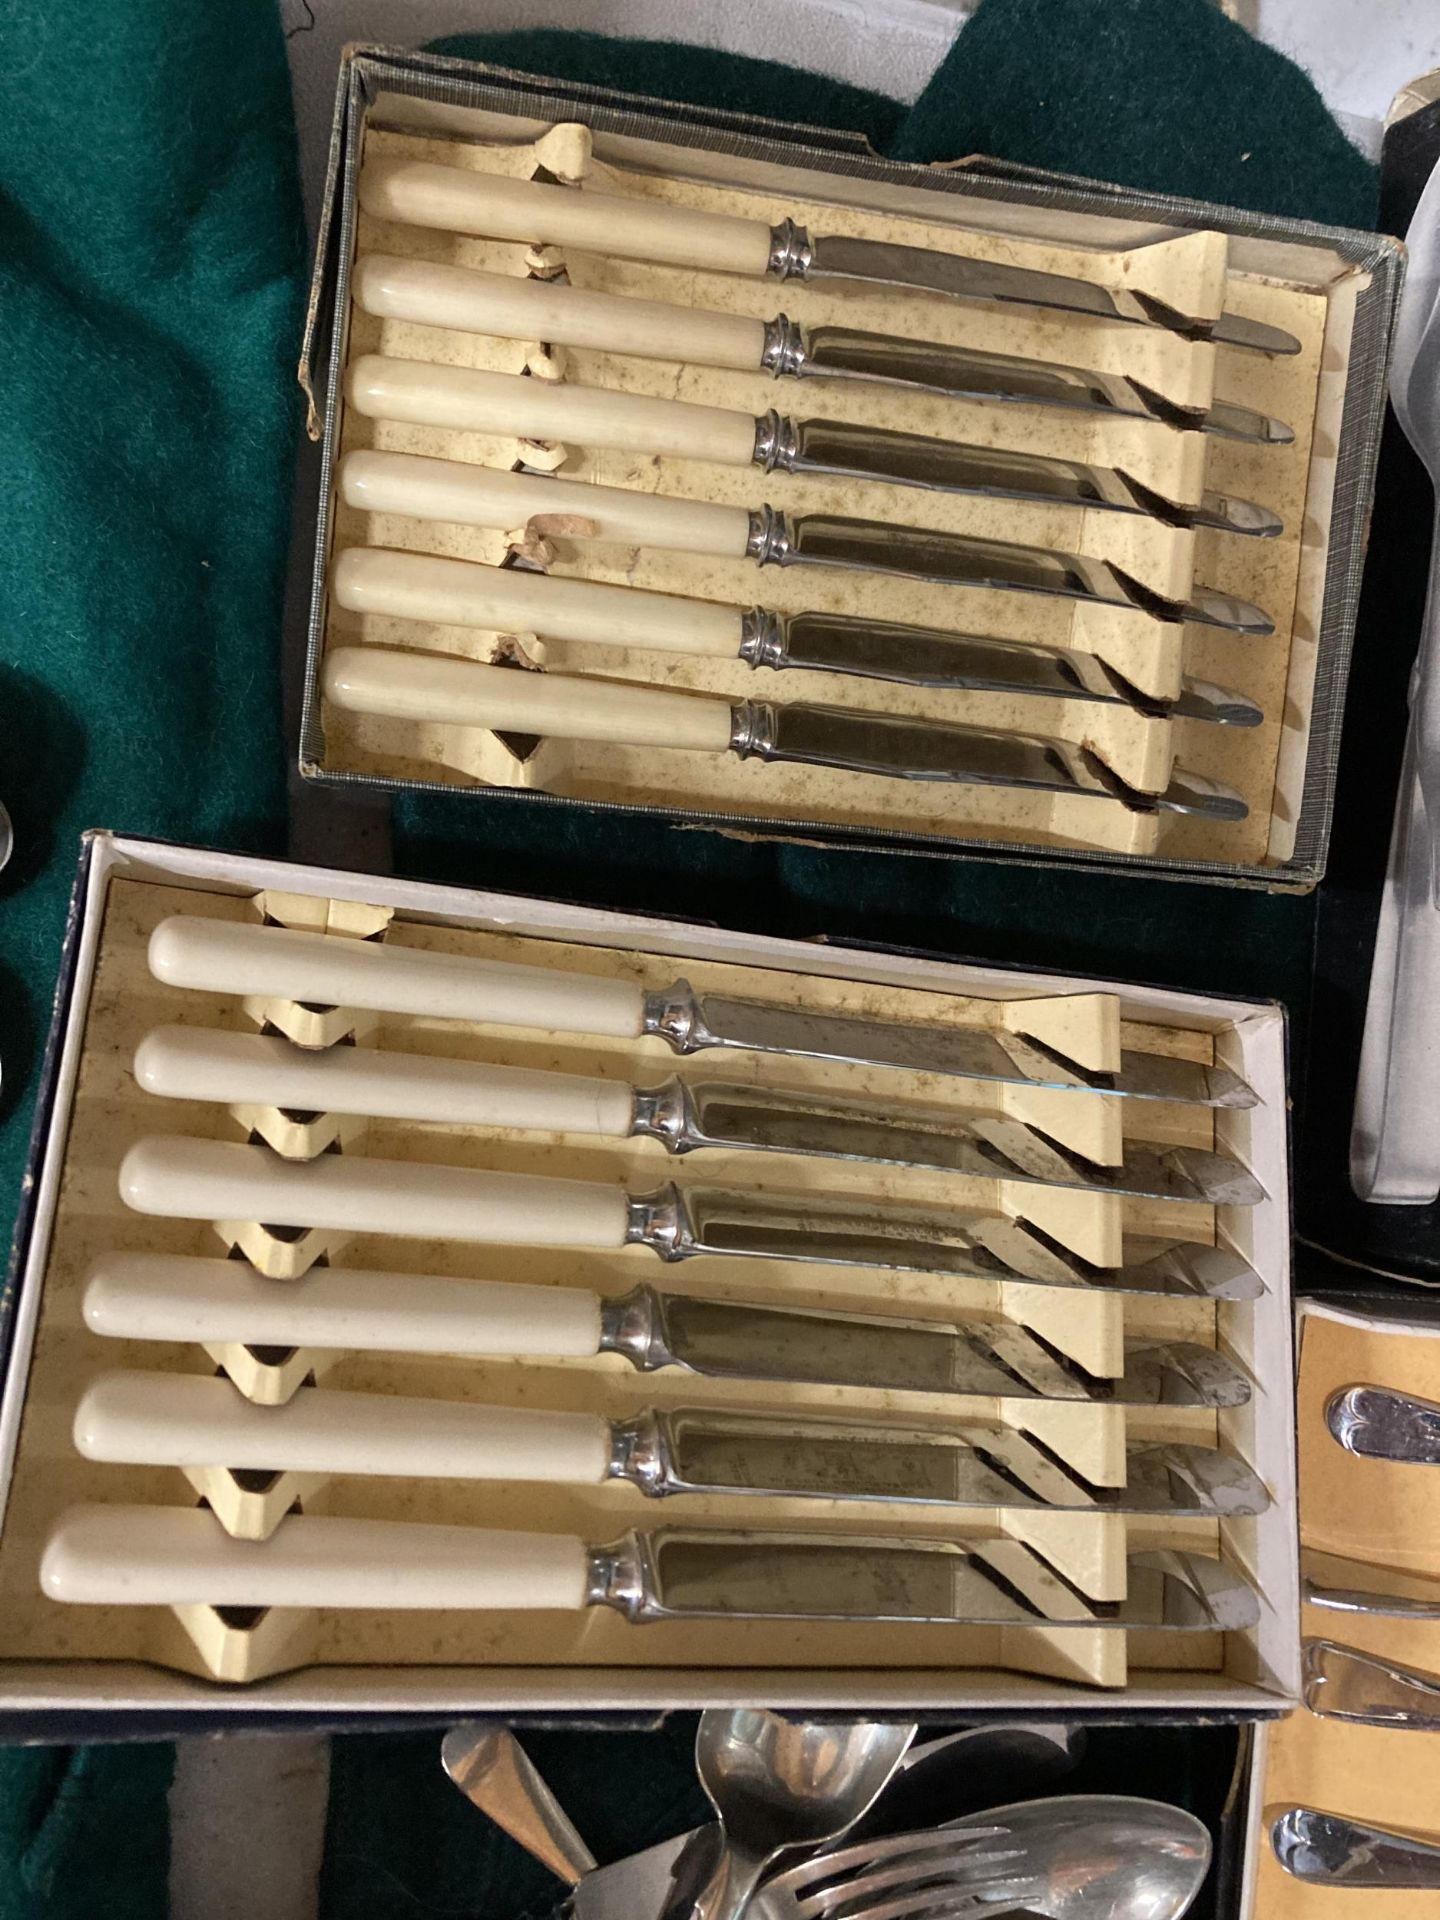 A LARGE AMOUNT OF VINTAGE BOXED AND UNBOXED FLATWARE TO INCLUDE KNIVES, FORKS, SPOONS, ETC - Image 2 of 2